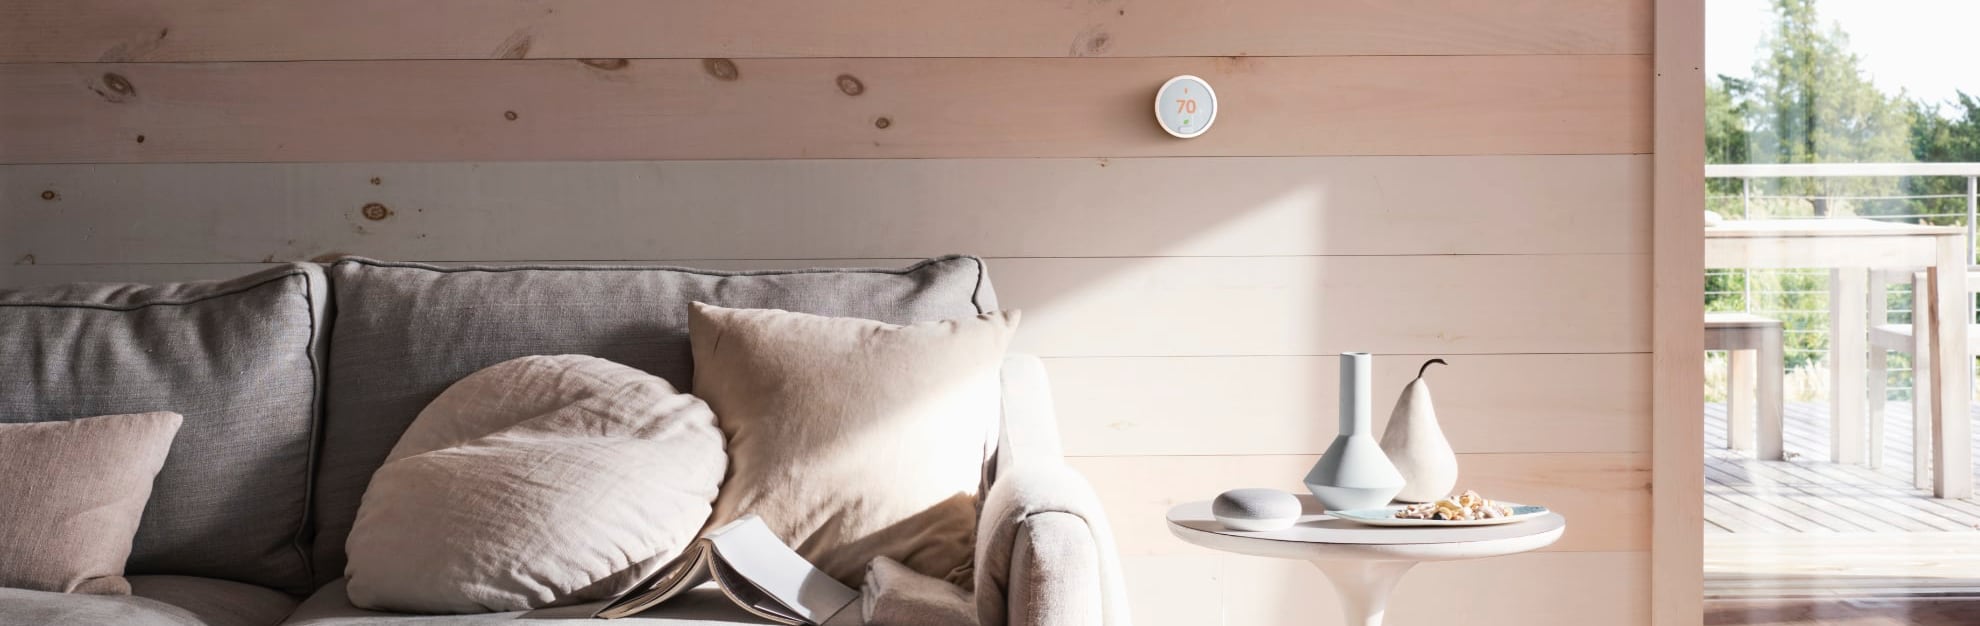 Vivint Home Automation in Waco